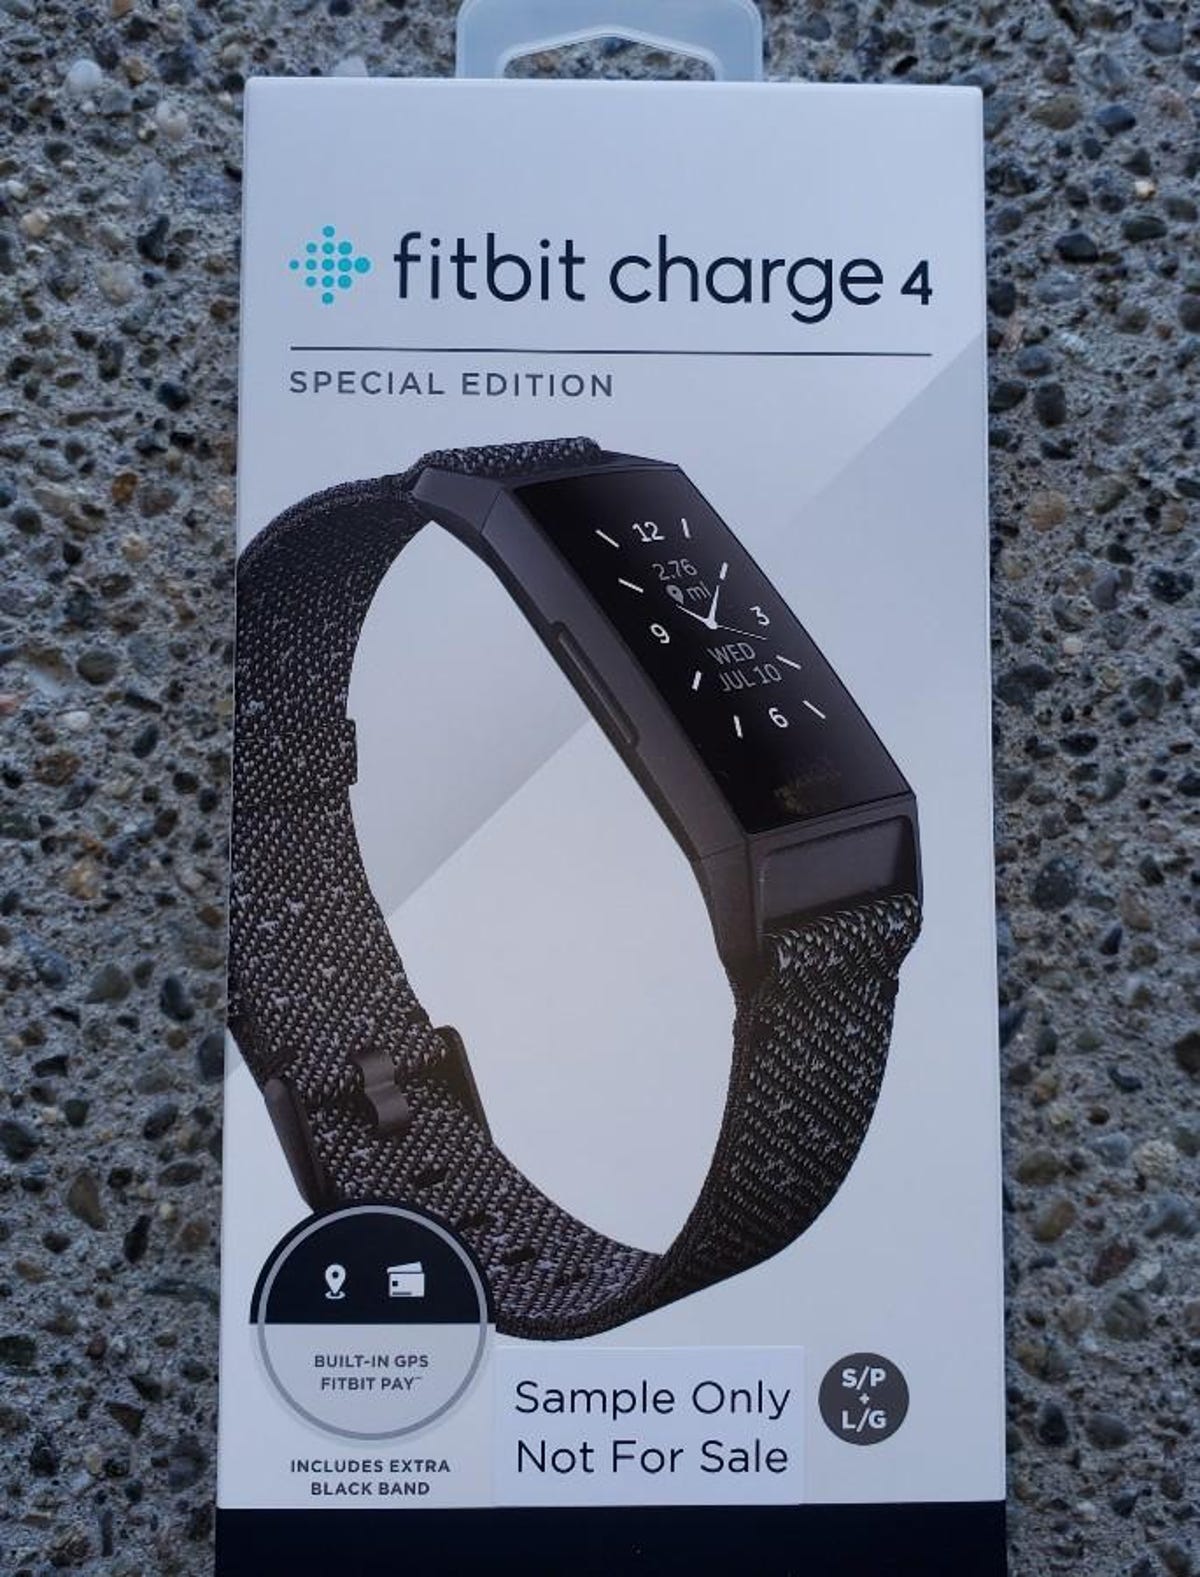 fitbit-charge-4-1.jpg